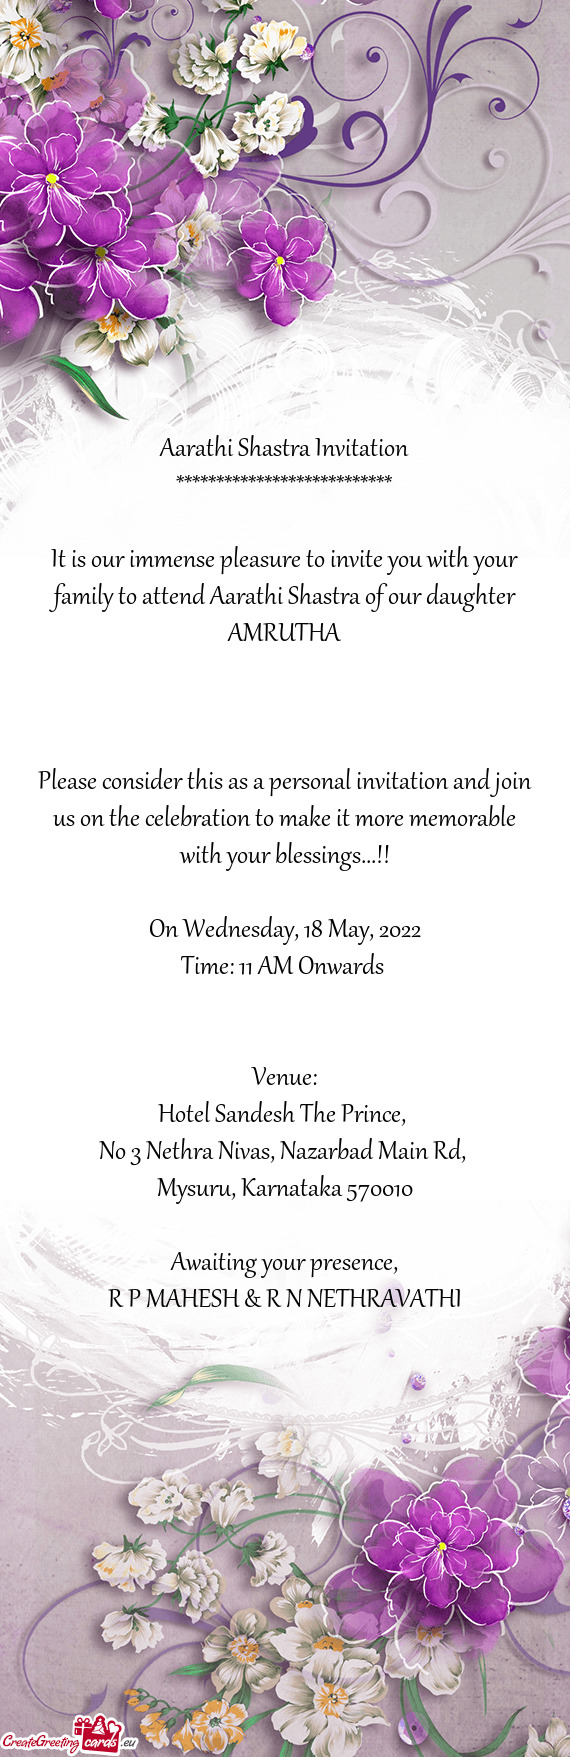 It is our immense pleasure to invite you with your family to attend Aarathi Shastra of our daughter